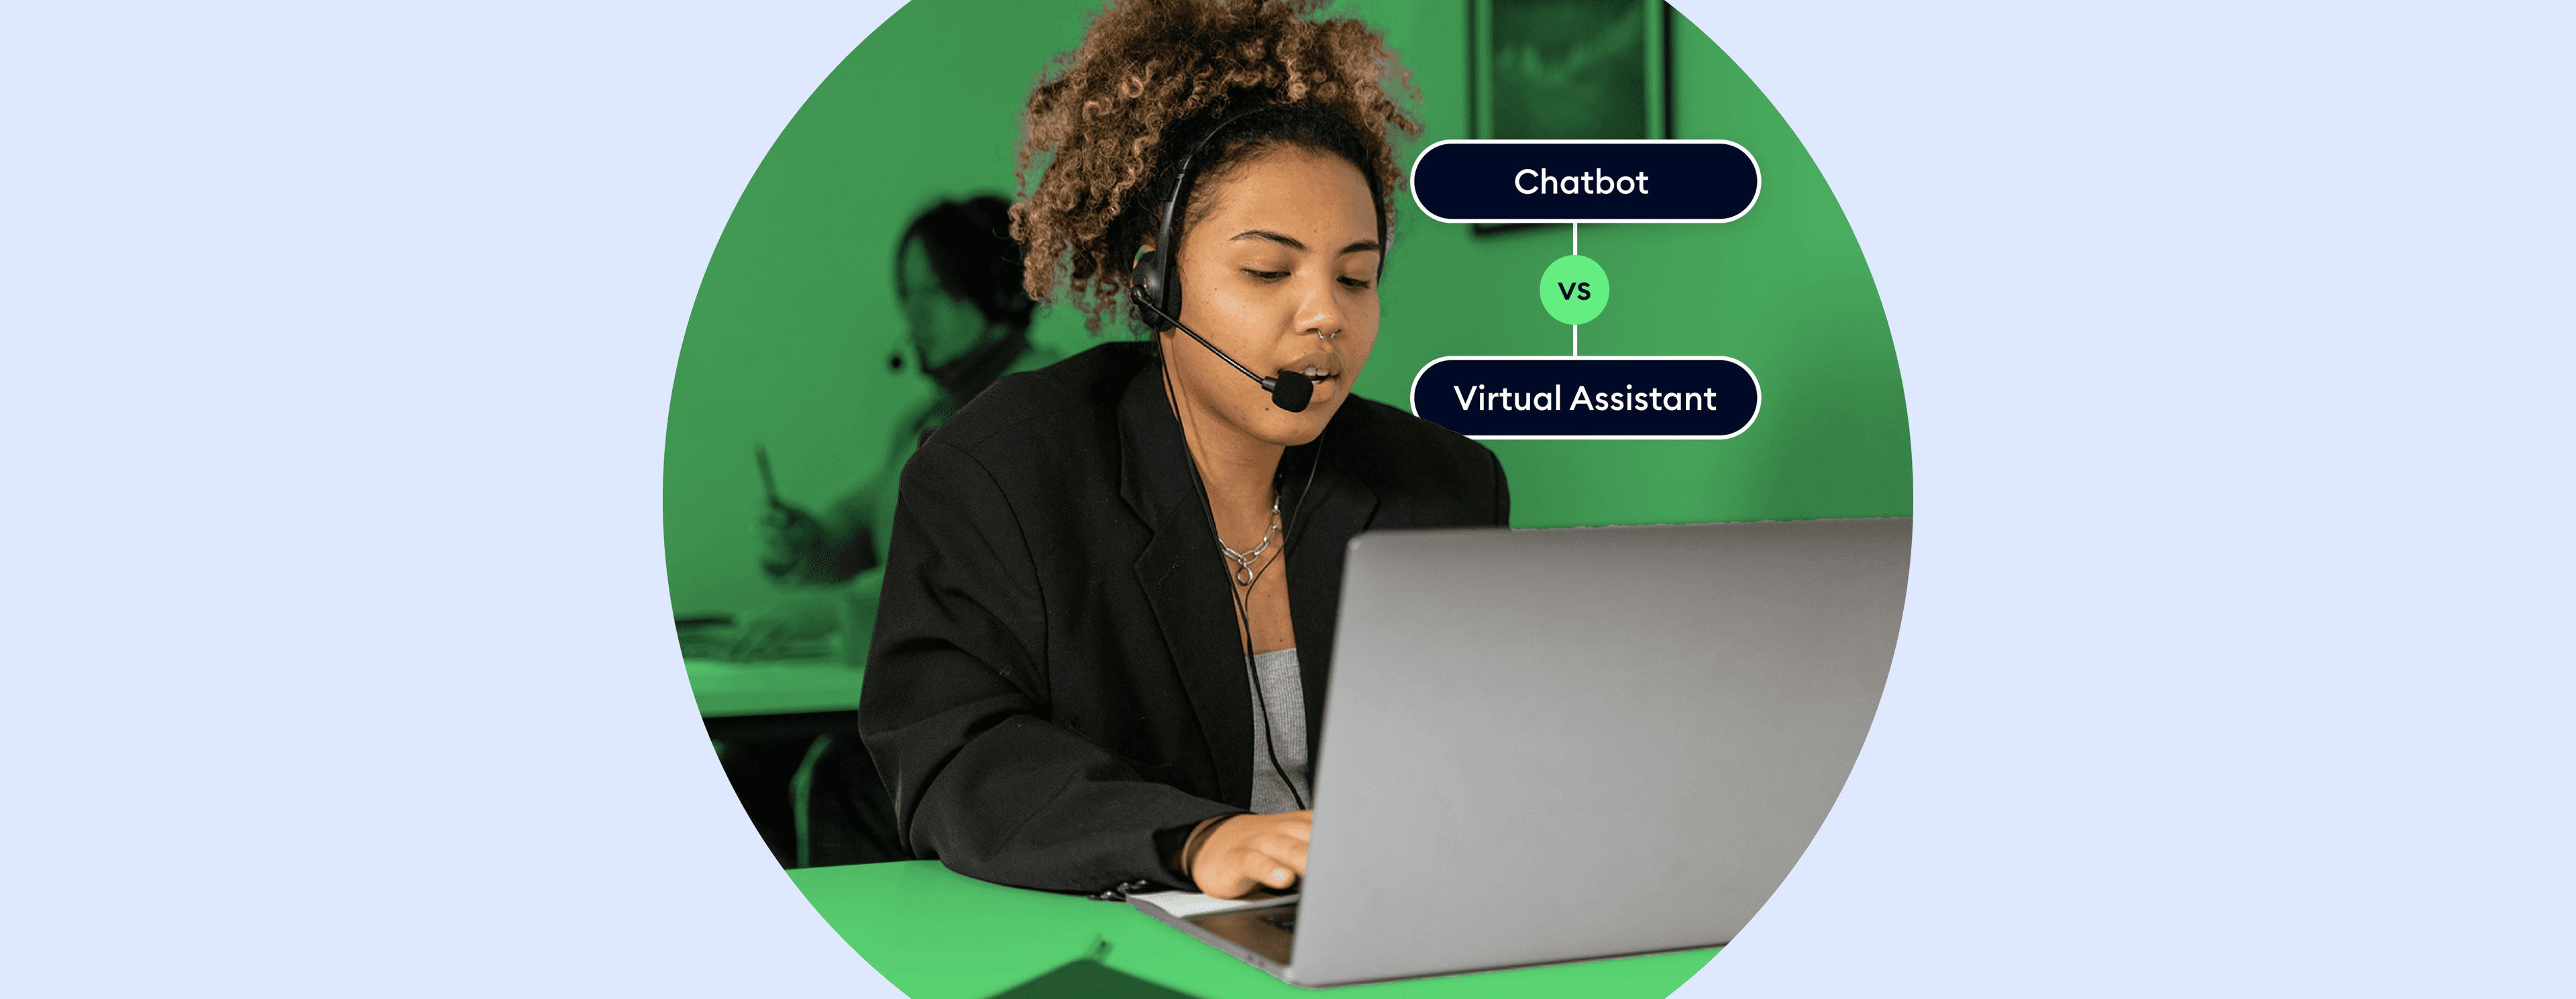 chatbot vs virtual assistant cover image